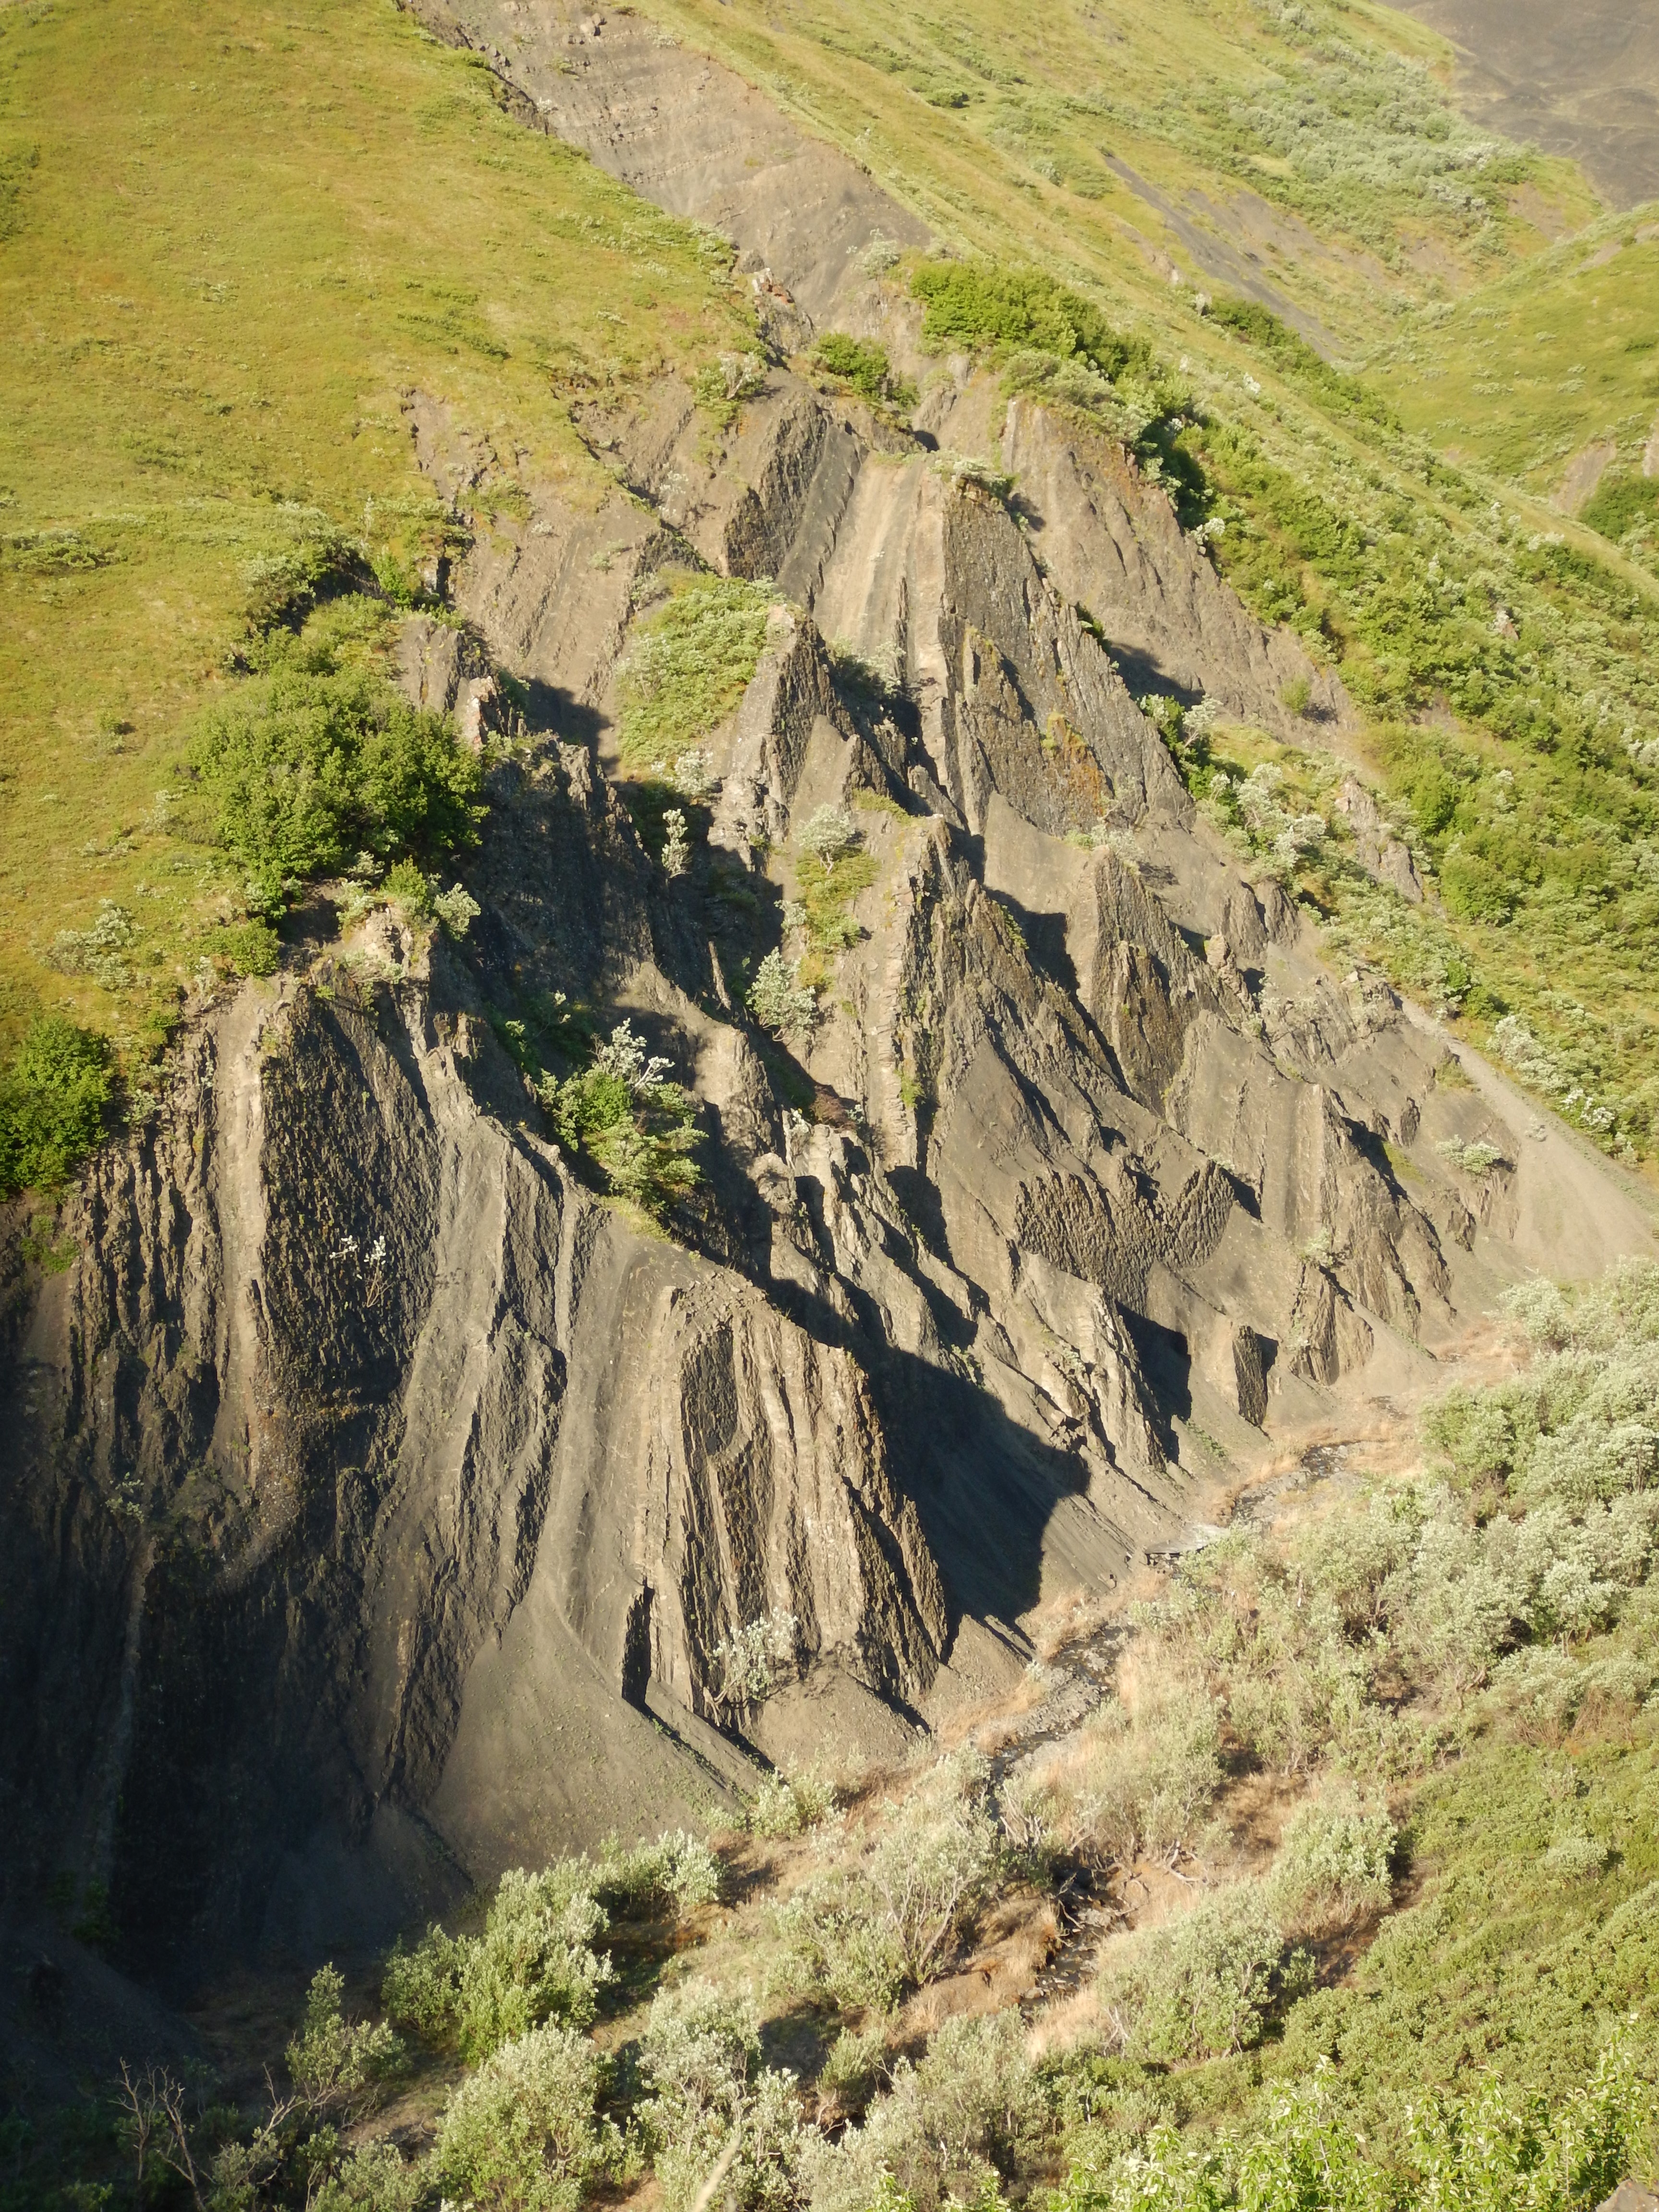 Layers of rock cliffs with dinosaur track divots on the surface, viewed from the air, and surrounded by vegetation.